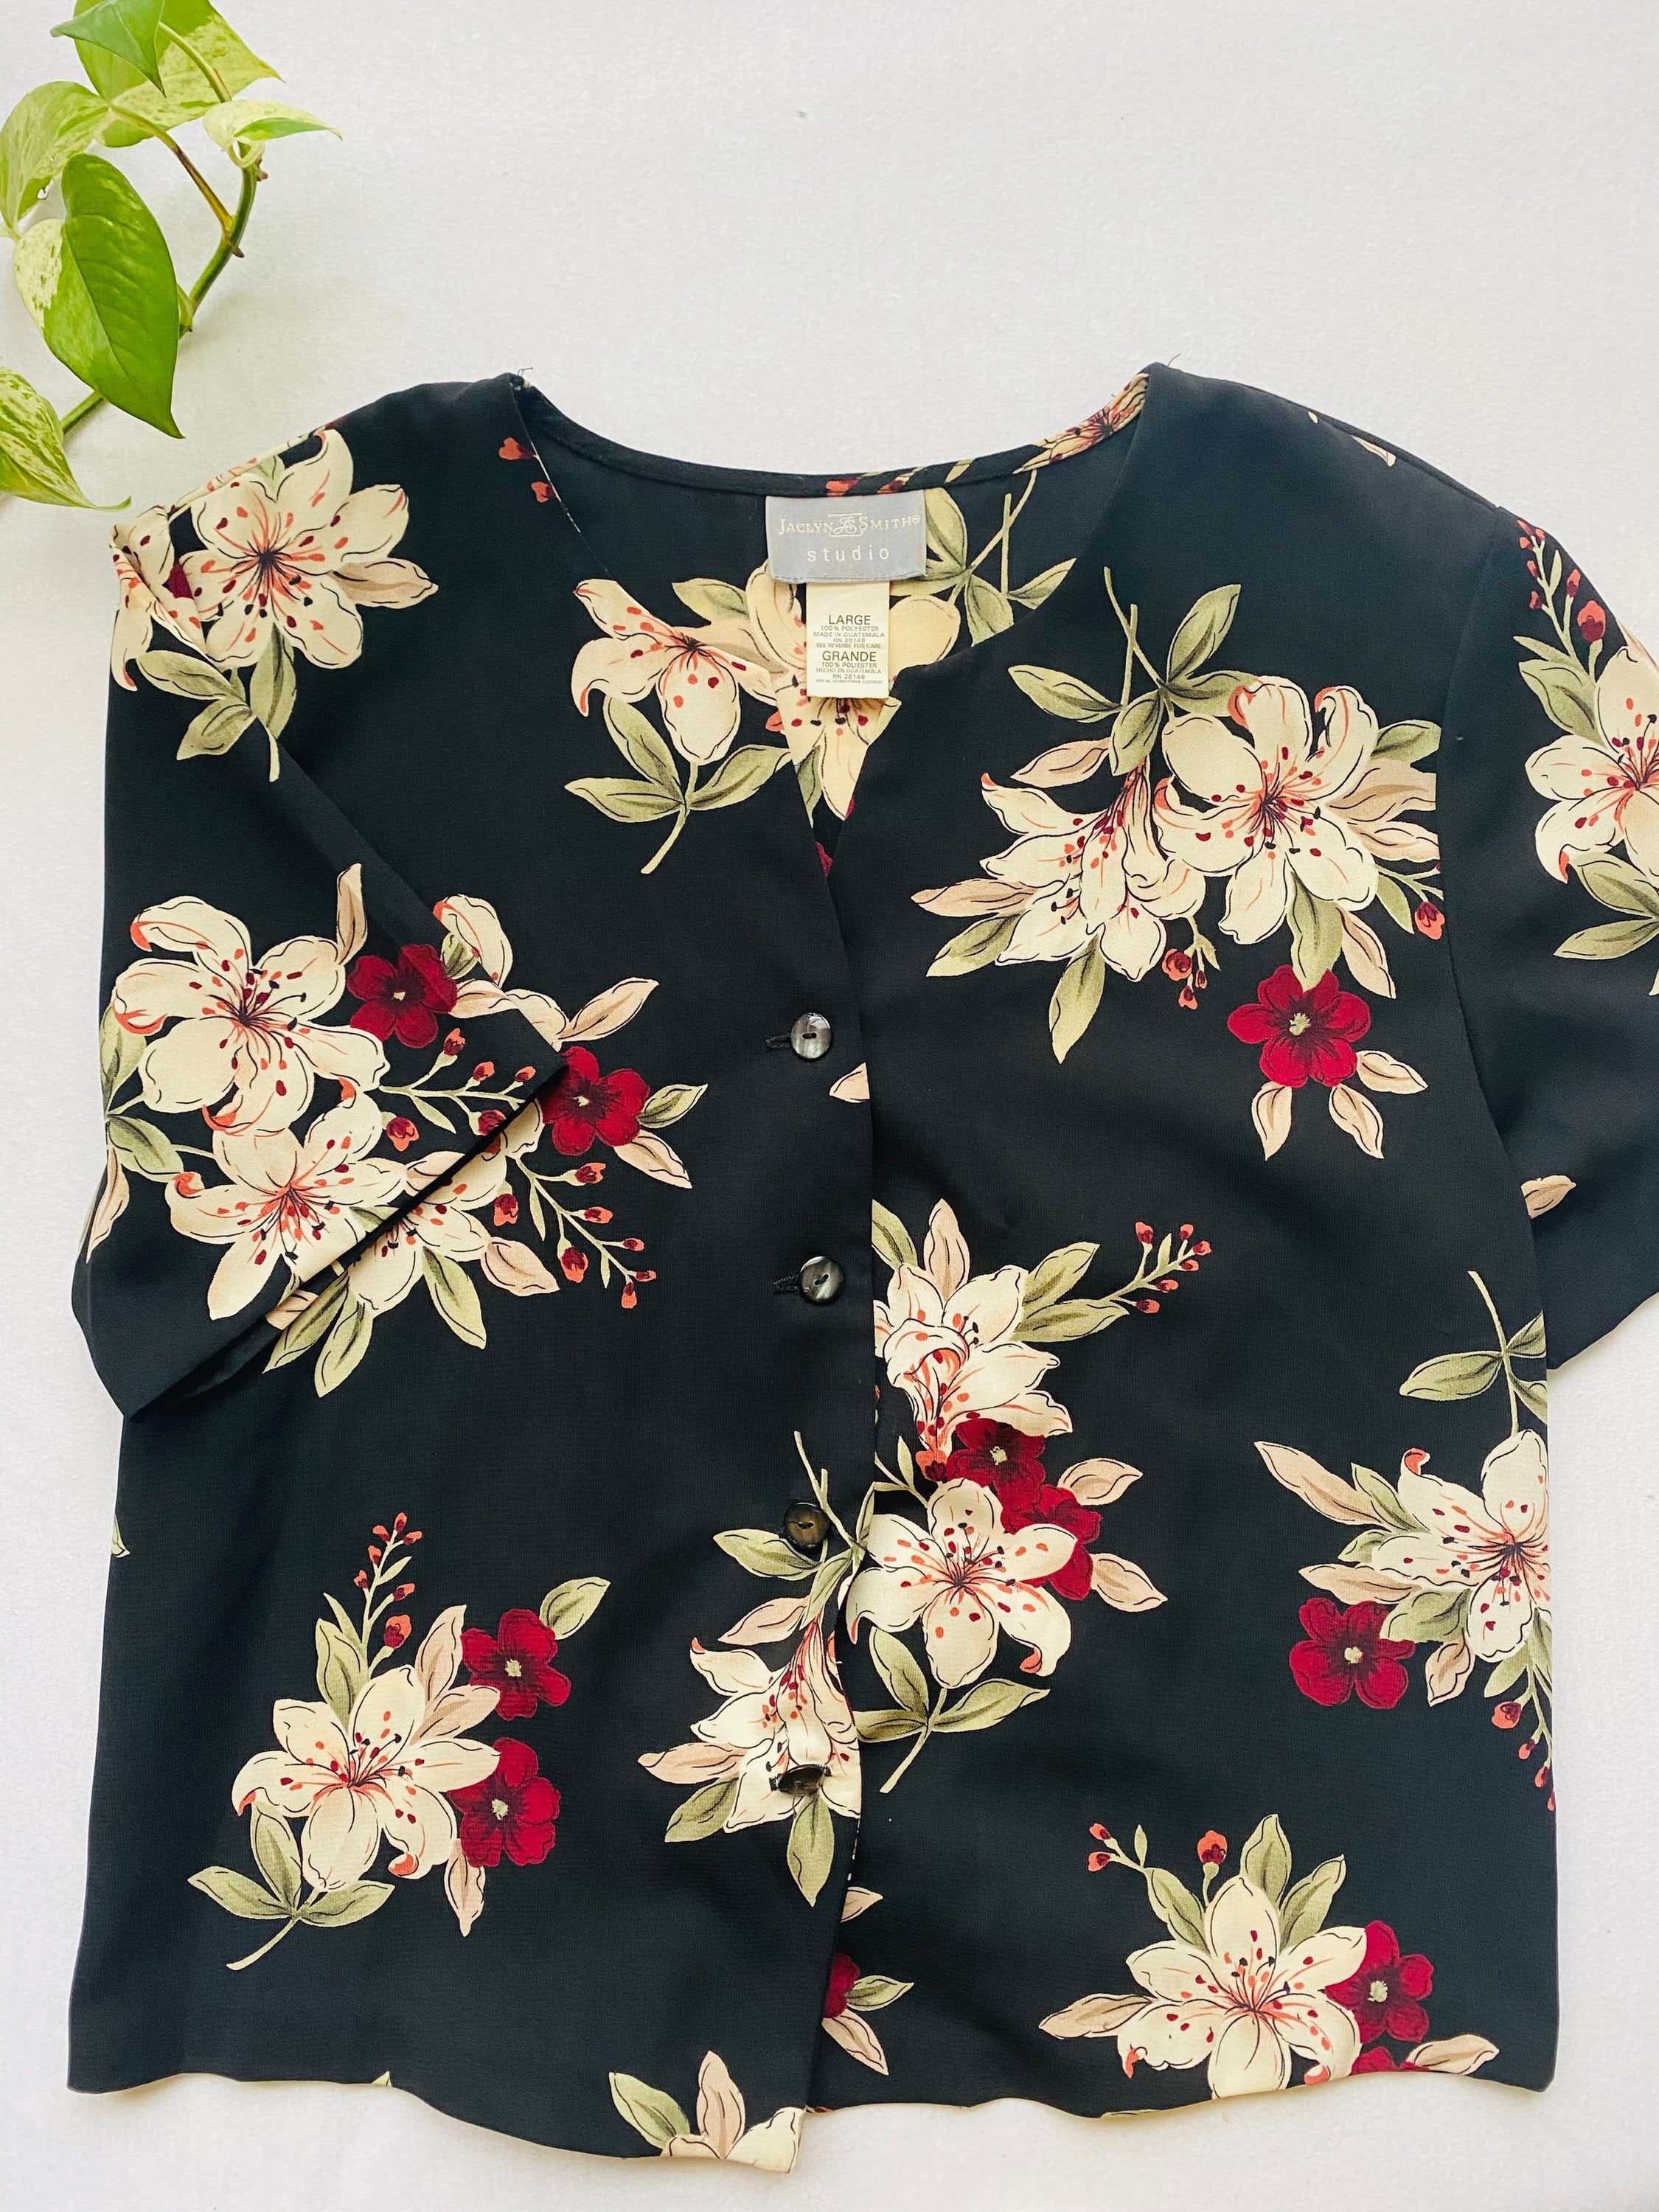 Vintage 90's Floral Top by Jaclyn Smith | Shop THRILLING